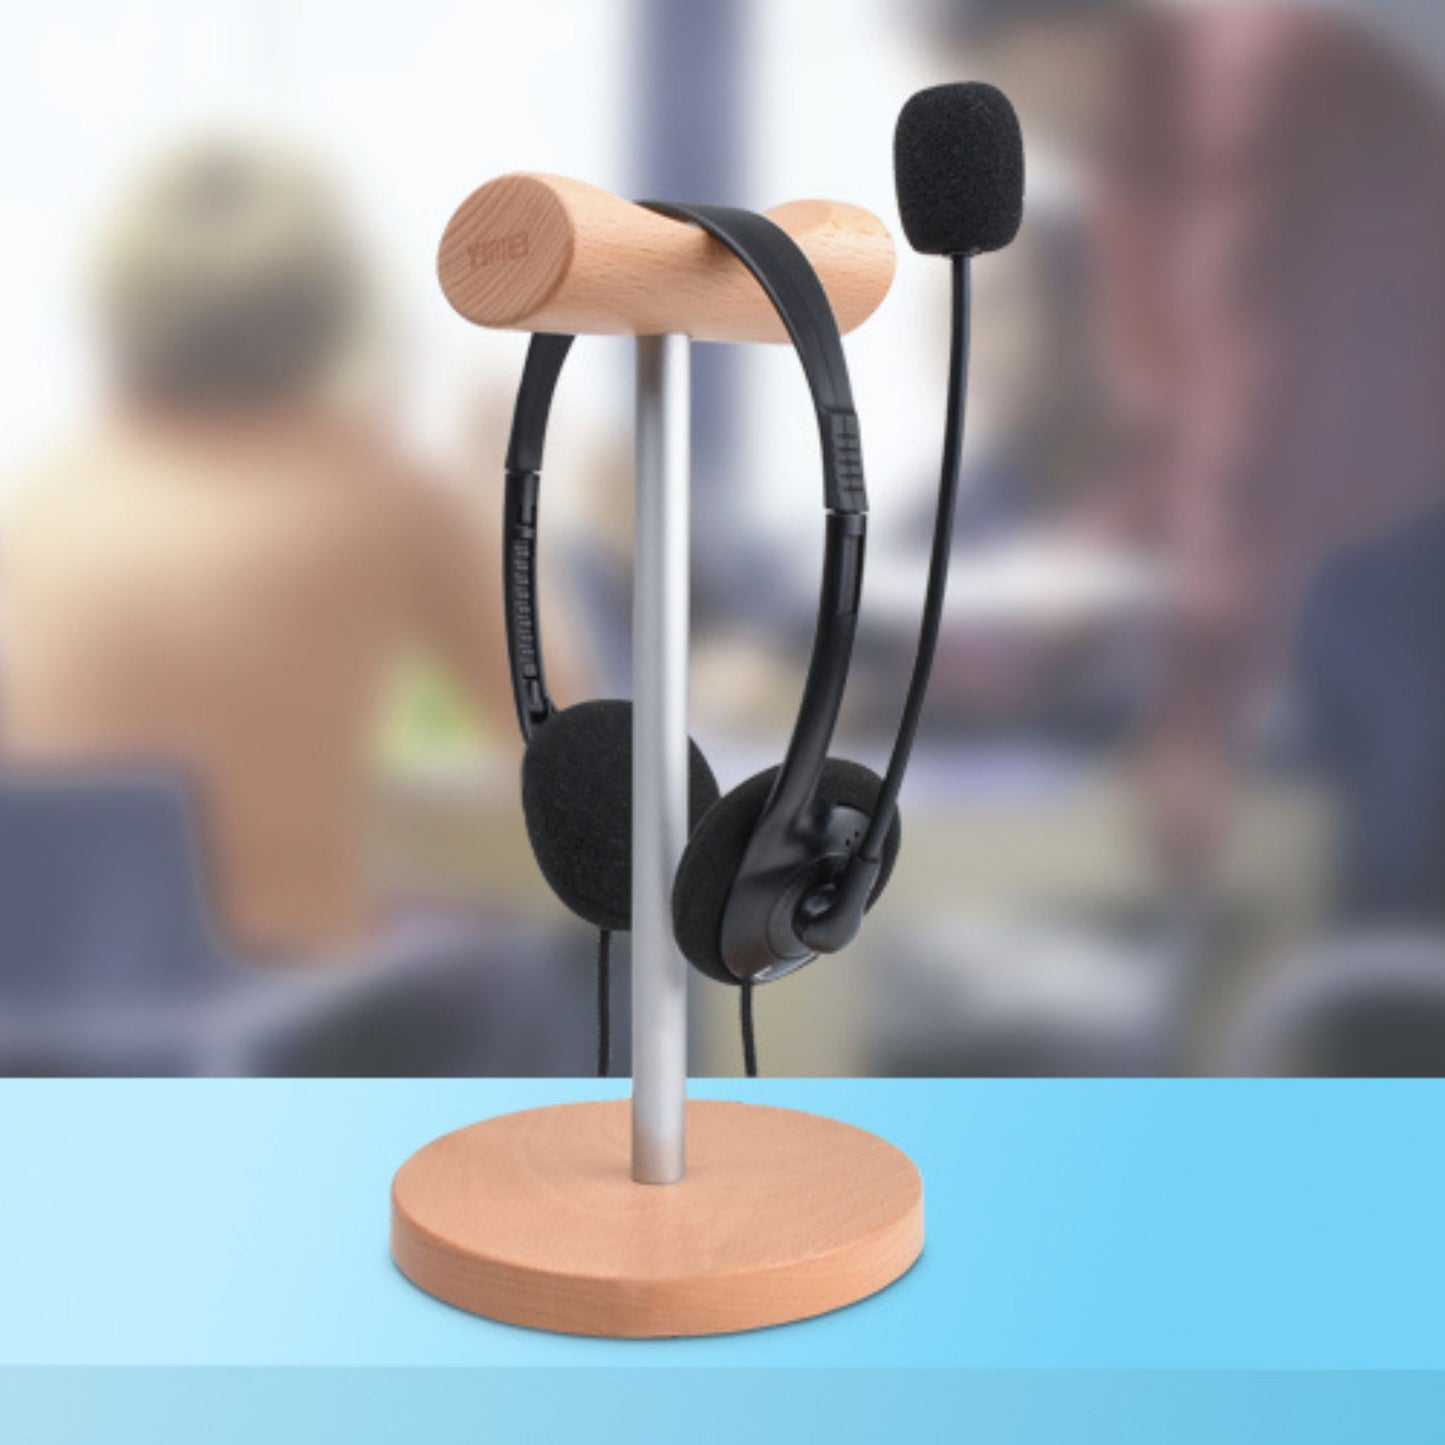 Usb headset with mic for home office